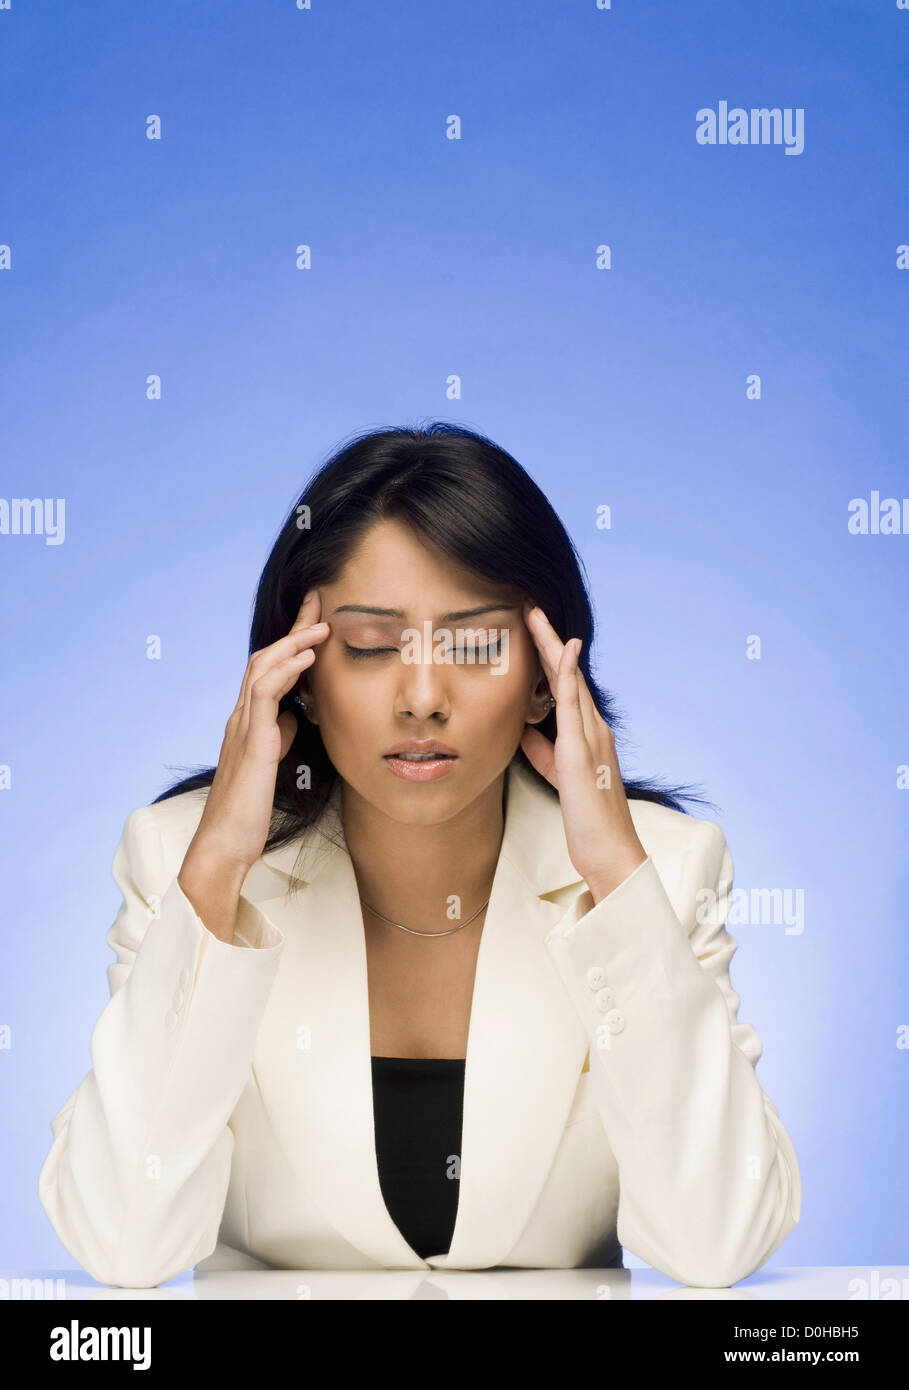 Frustrated businesswoman rubbing her temple Stock Photo